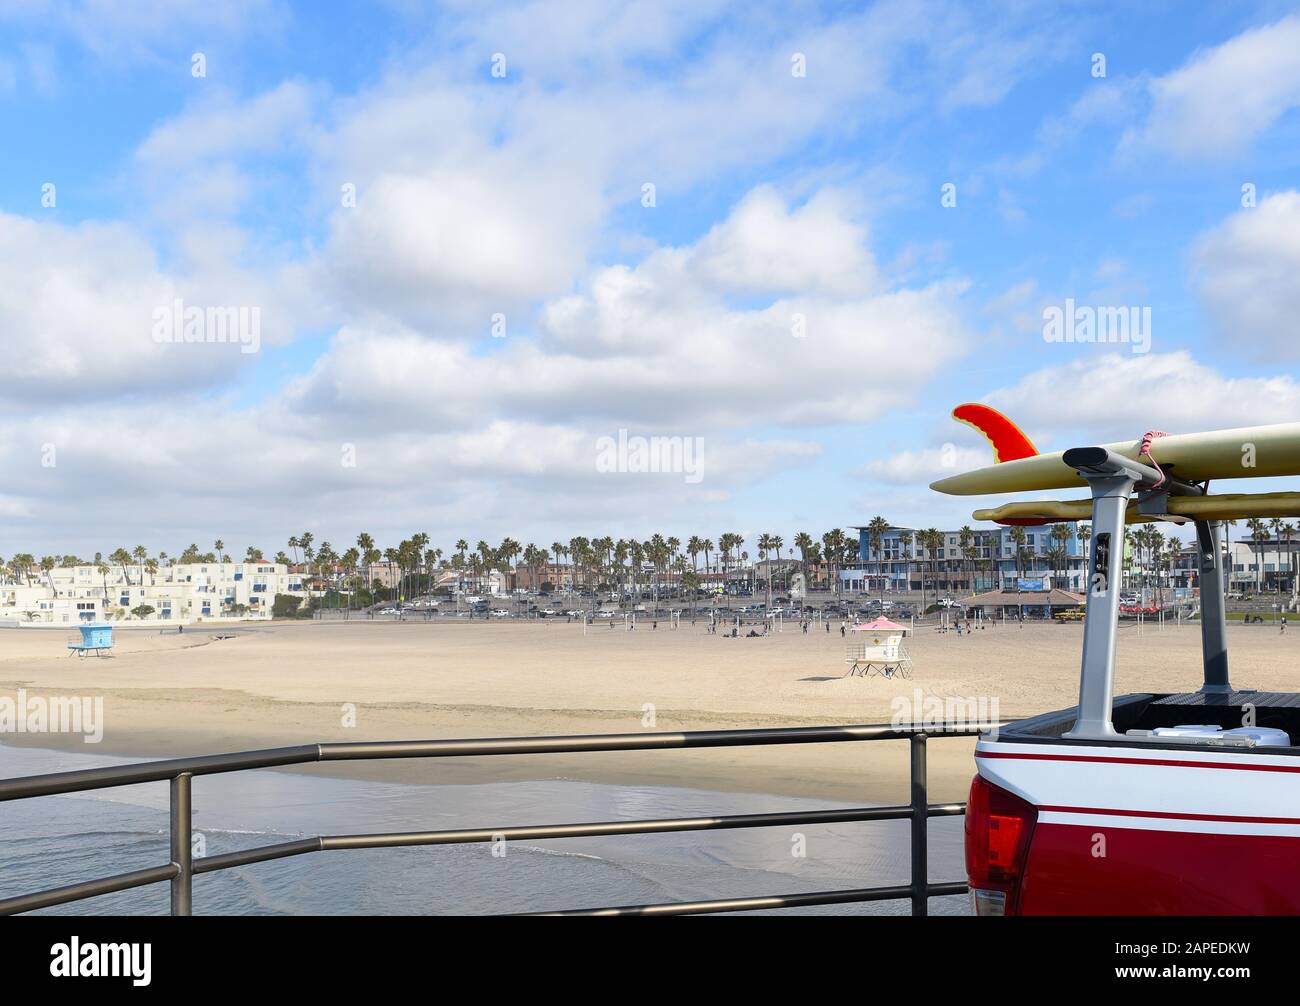 HUNTINGTON BEACH, CALIFORNIA - 22 JAN 2020: Surfboard on Lifeguard truck rack on the pier with beach and town in the background. Stock Photo